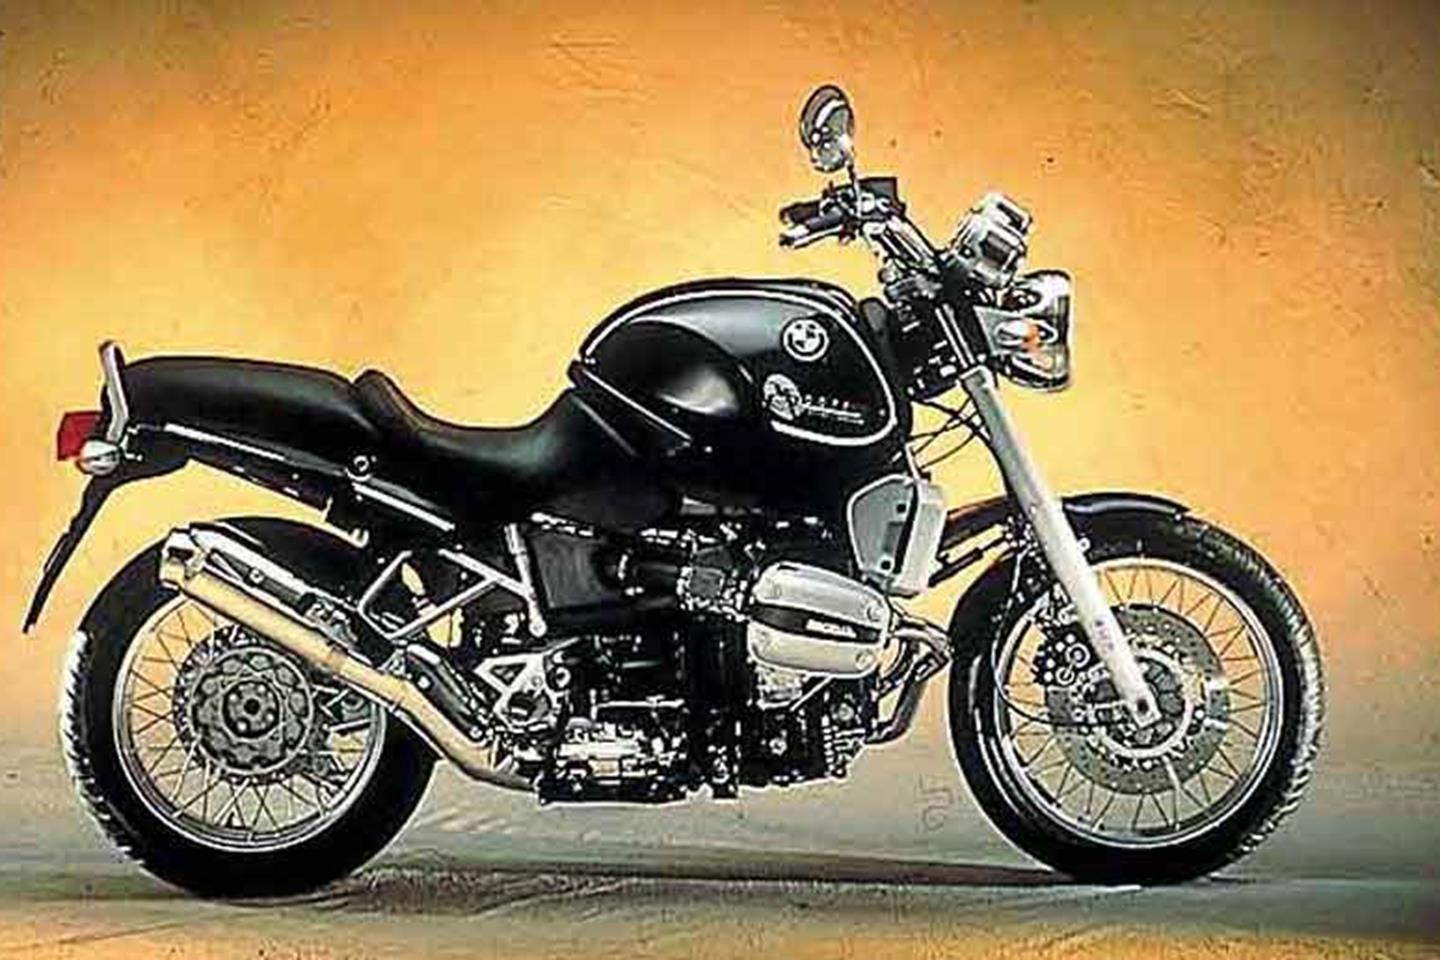 BMW R1100R (1995-2003) Review | Speed, Specs & Prices